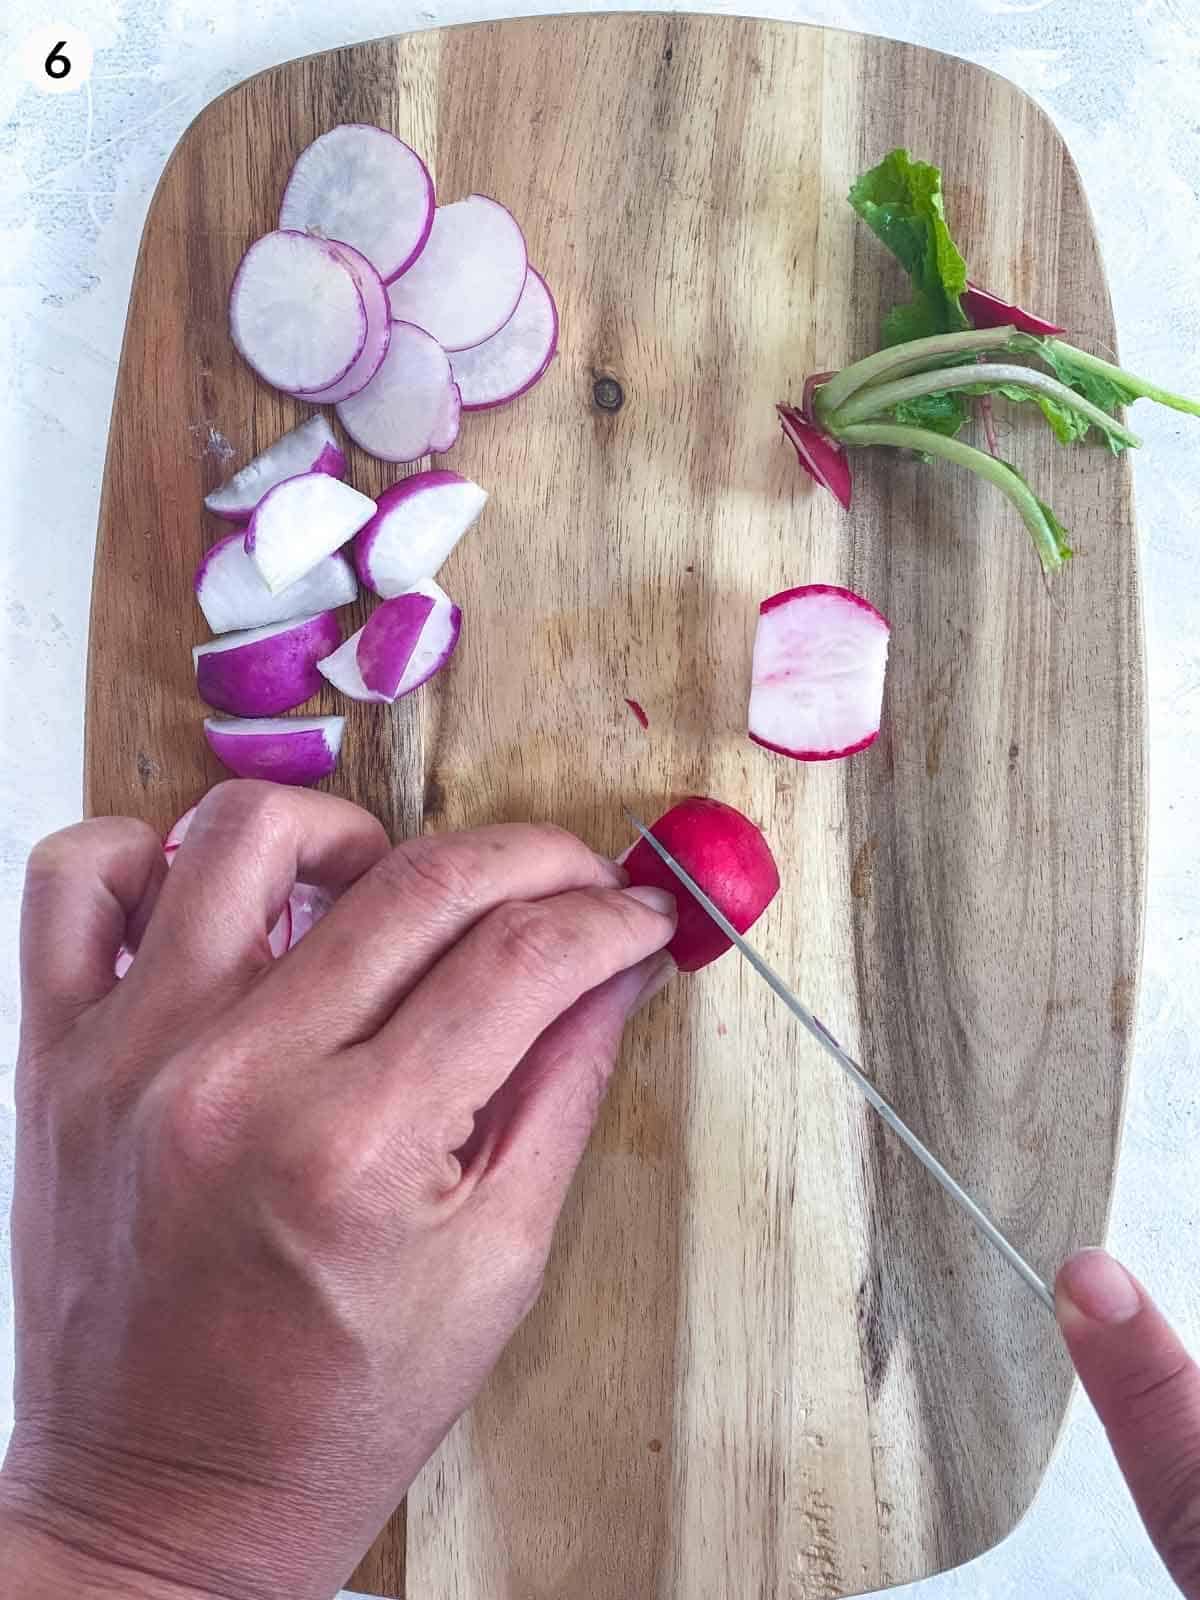 cutting radishes with a knife on a wooden board